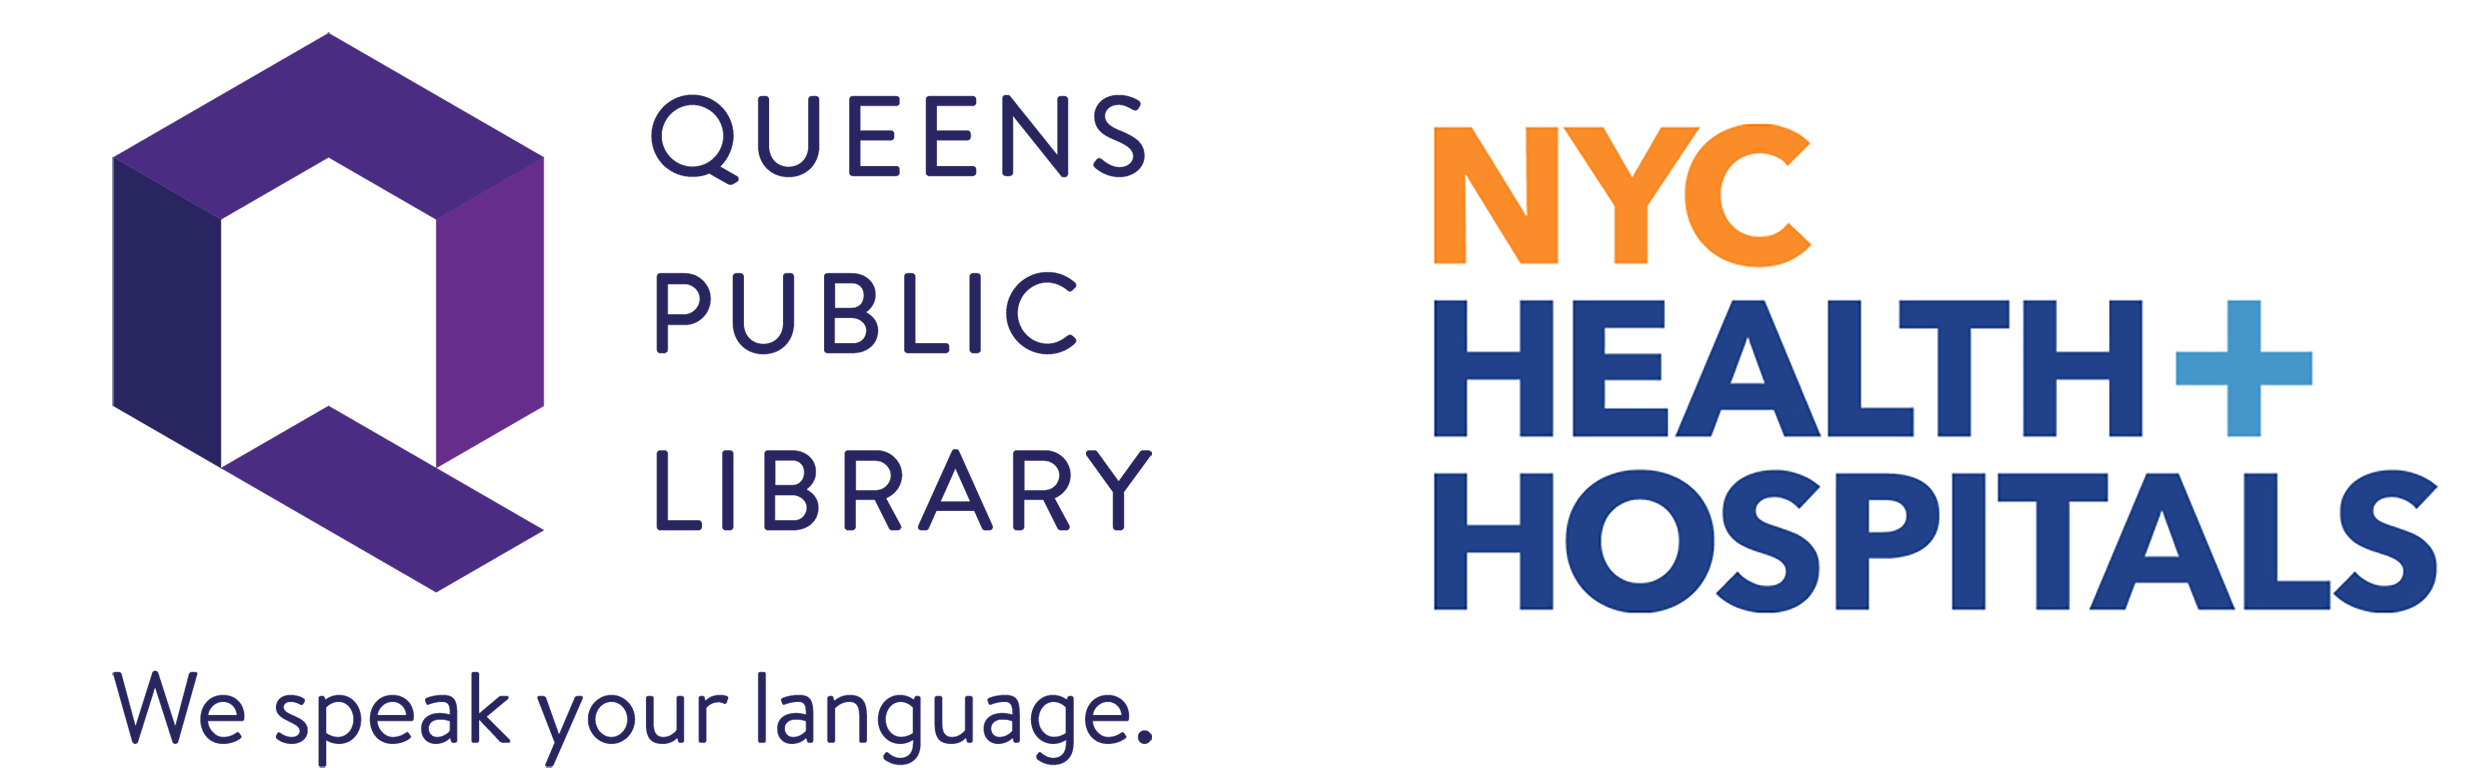 Queens Public Library Partners with NYC Health + Hospitals